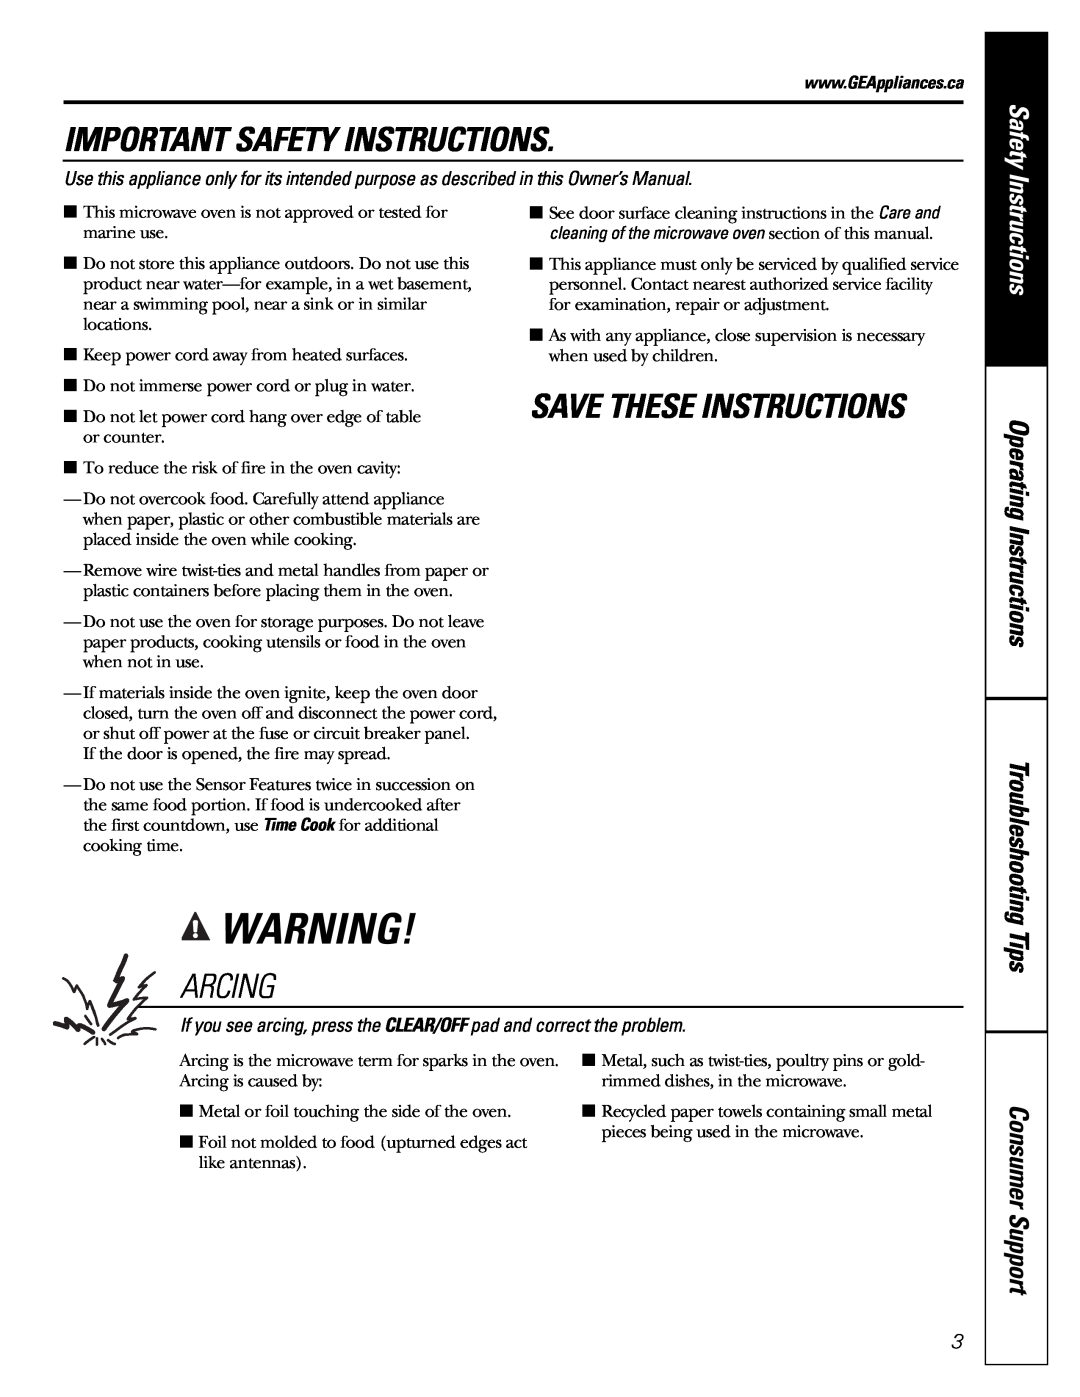 Mabe Canada PEB206C owner manual Save These Instructions, Arcing, Safety, Operating Instructions, Tips Consumer Support 